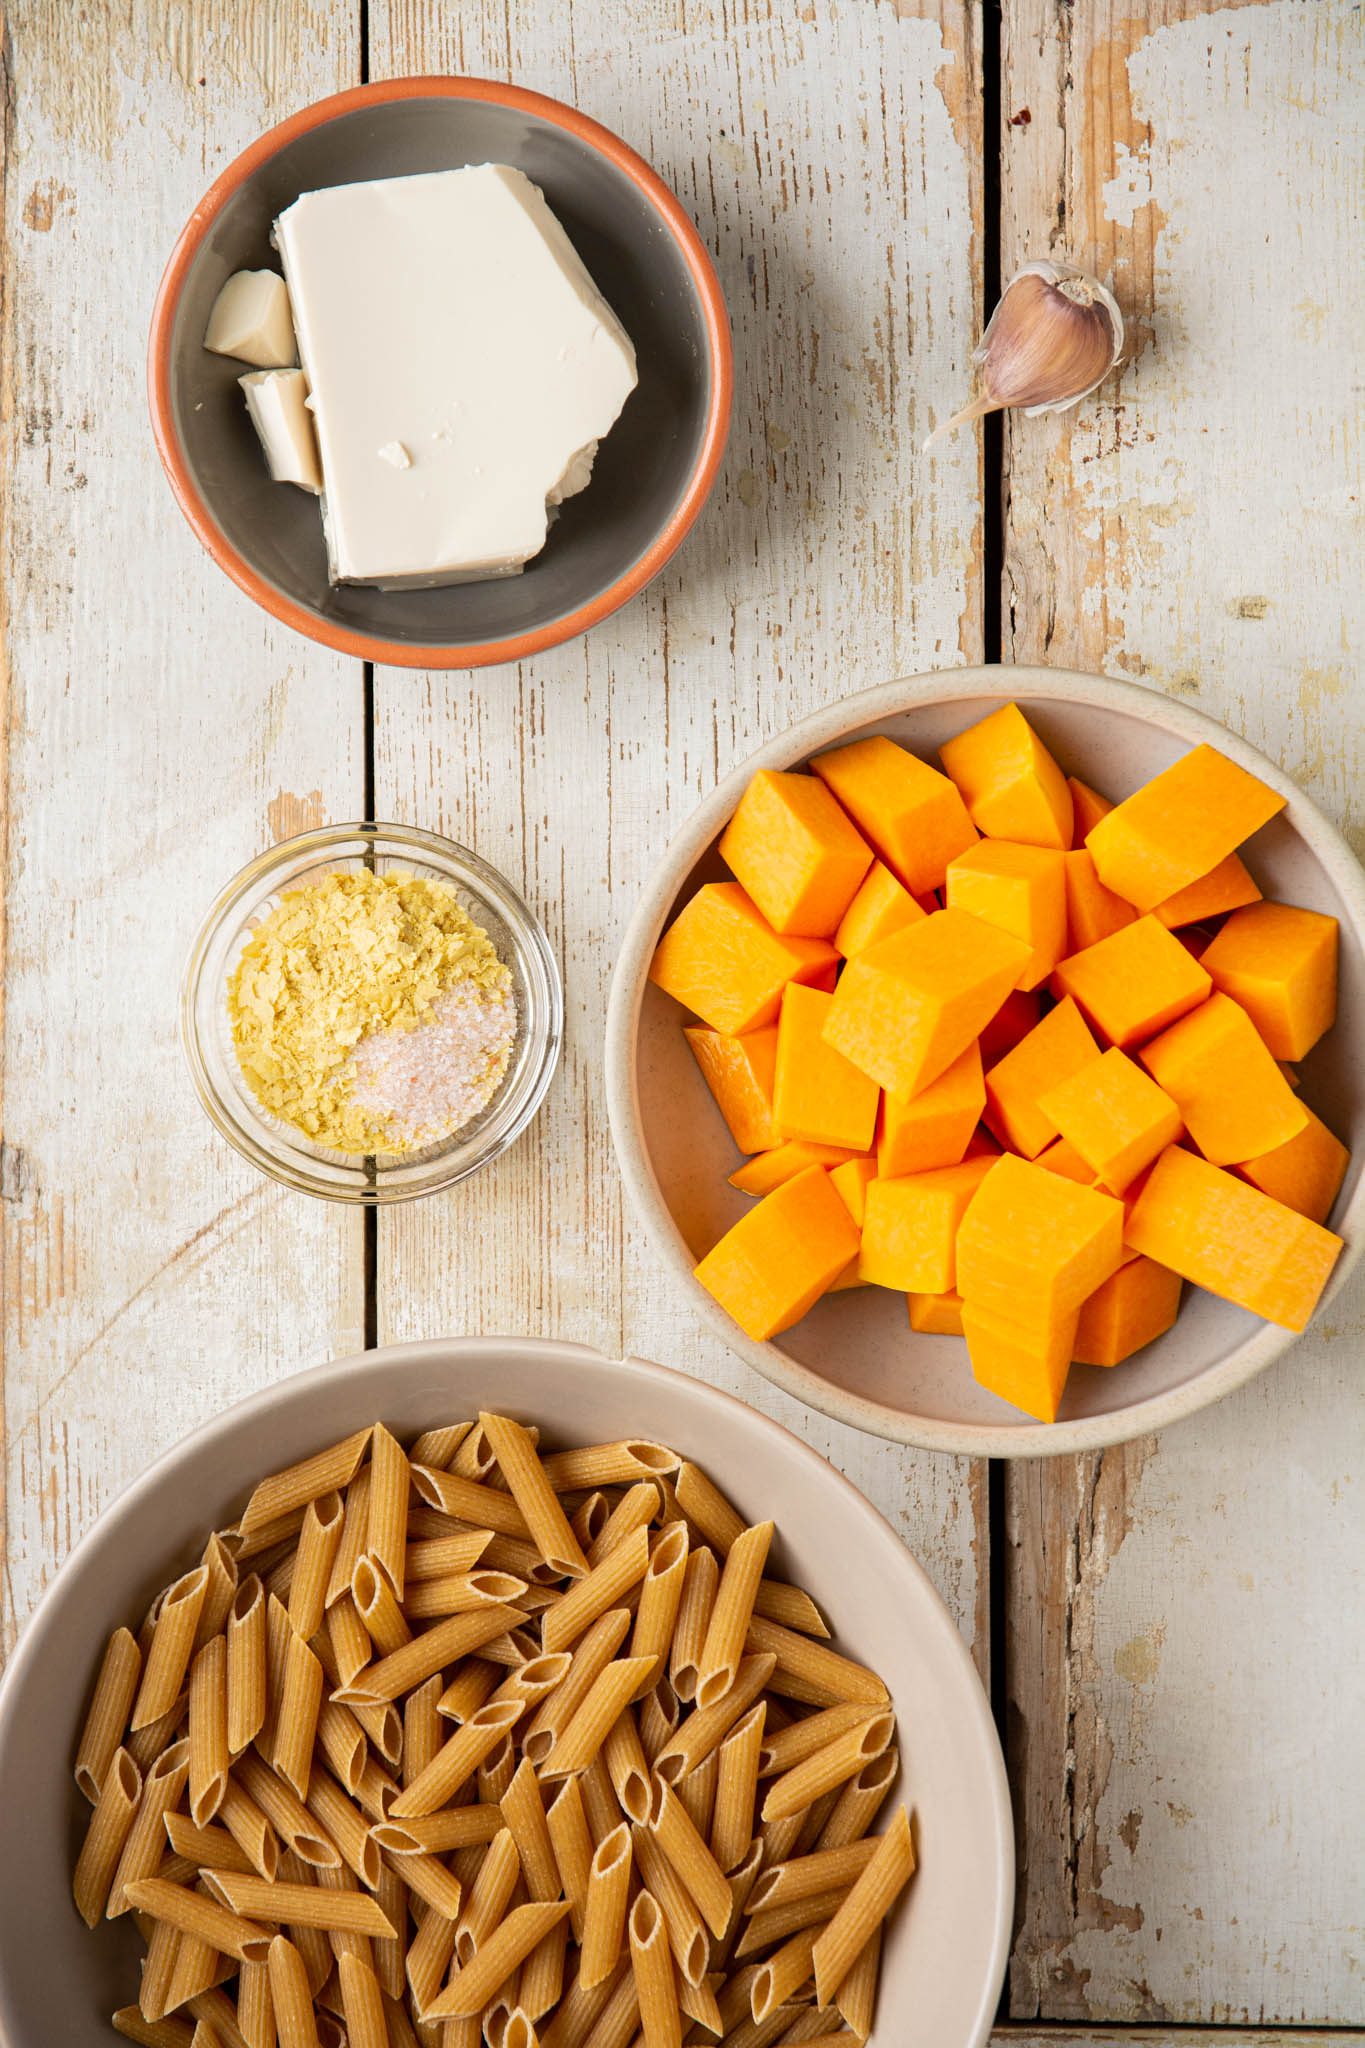 Learn how to make delicious and healthy vegan butternut squash mac and cheese. Besides being plant-based, this recipe is also nut-free, oil-free, and low-fat. Besides, it's very easy to make.